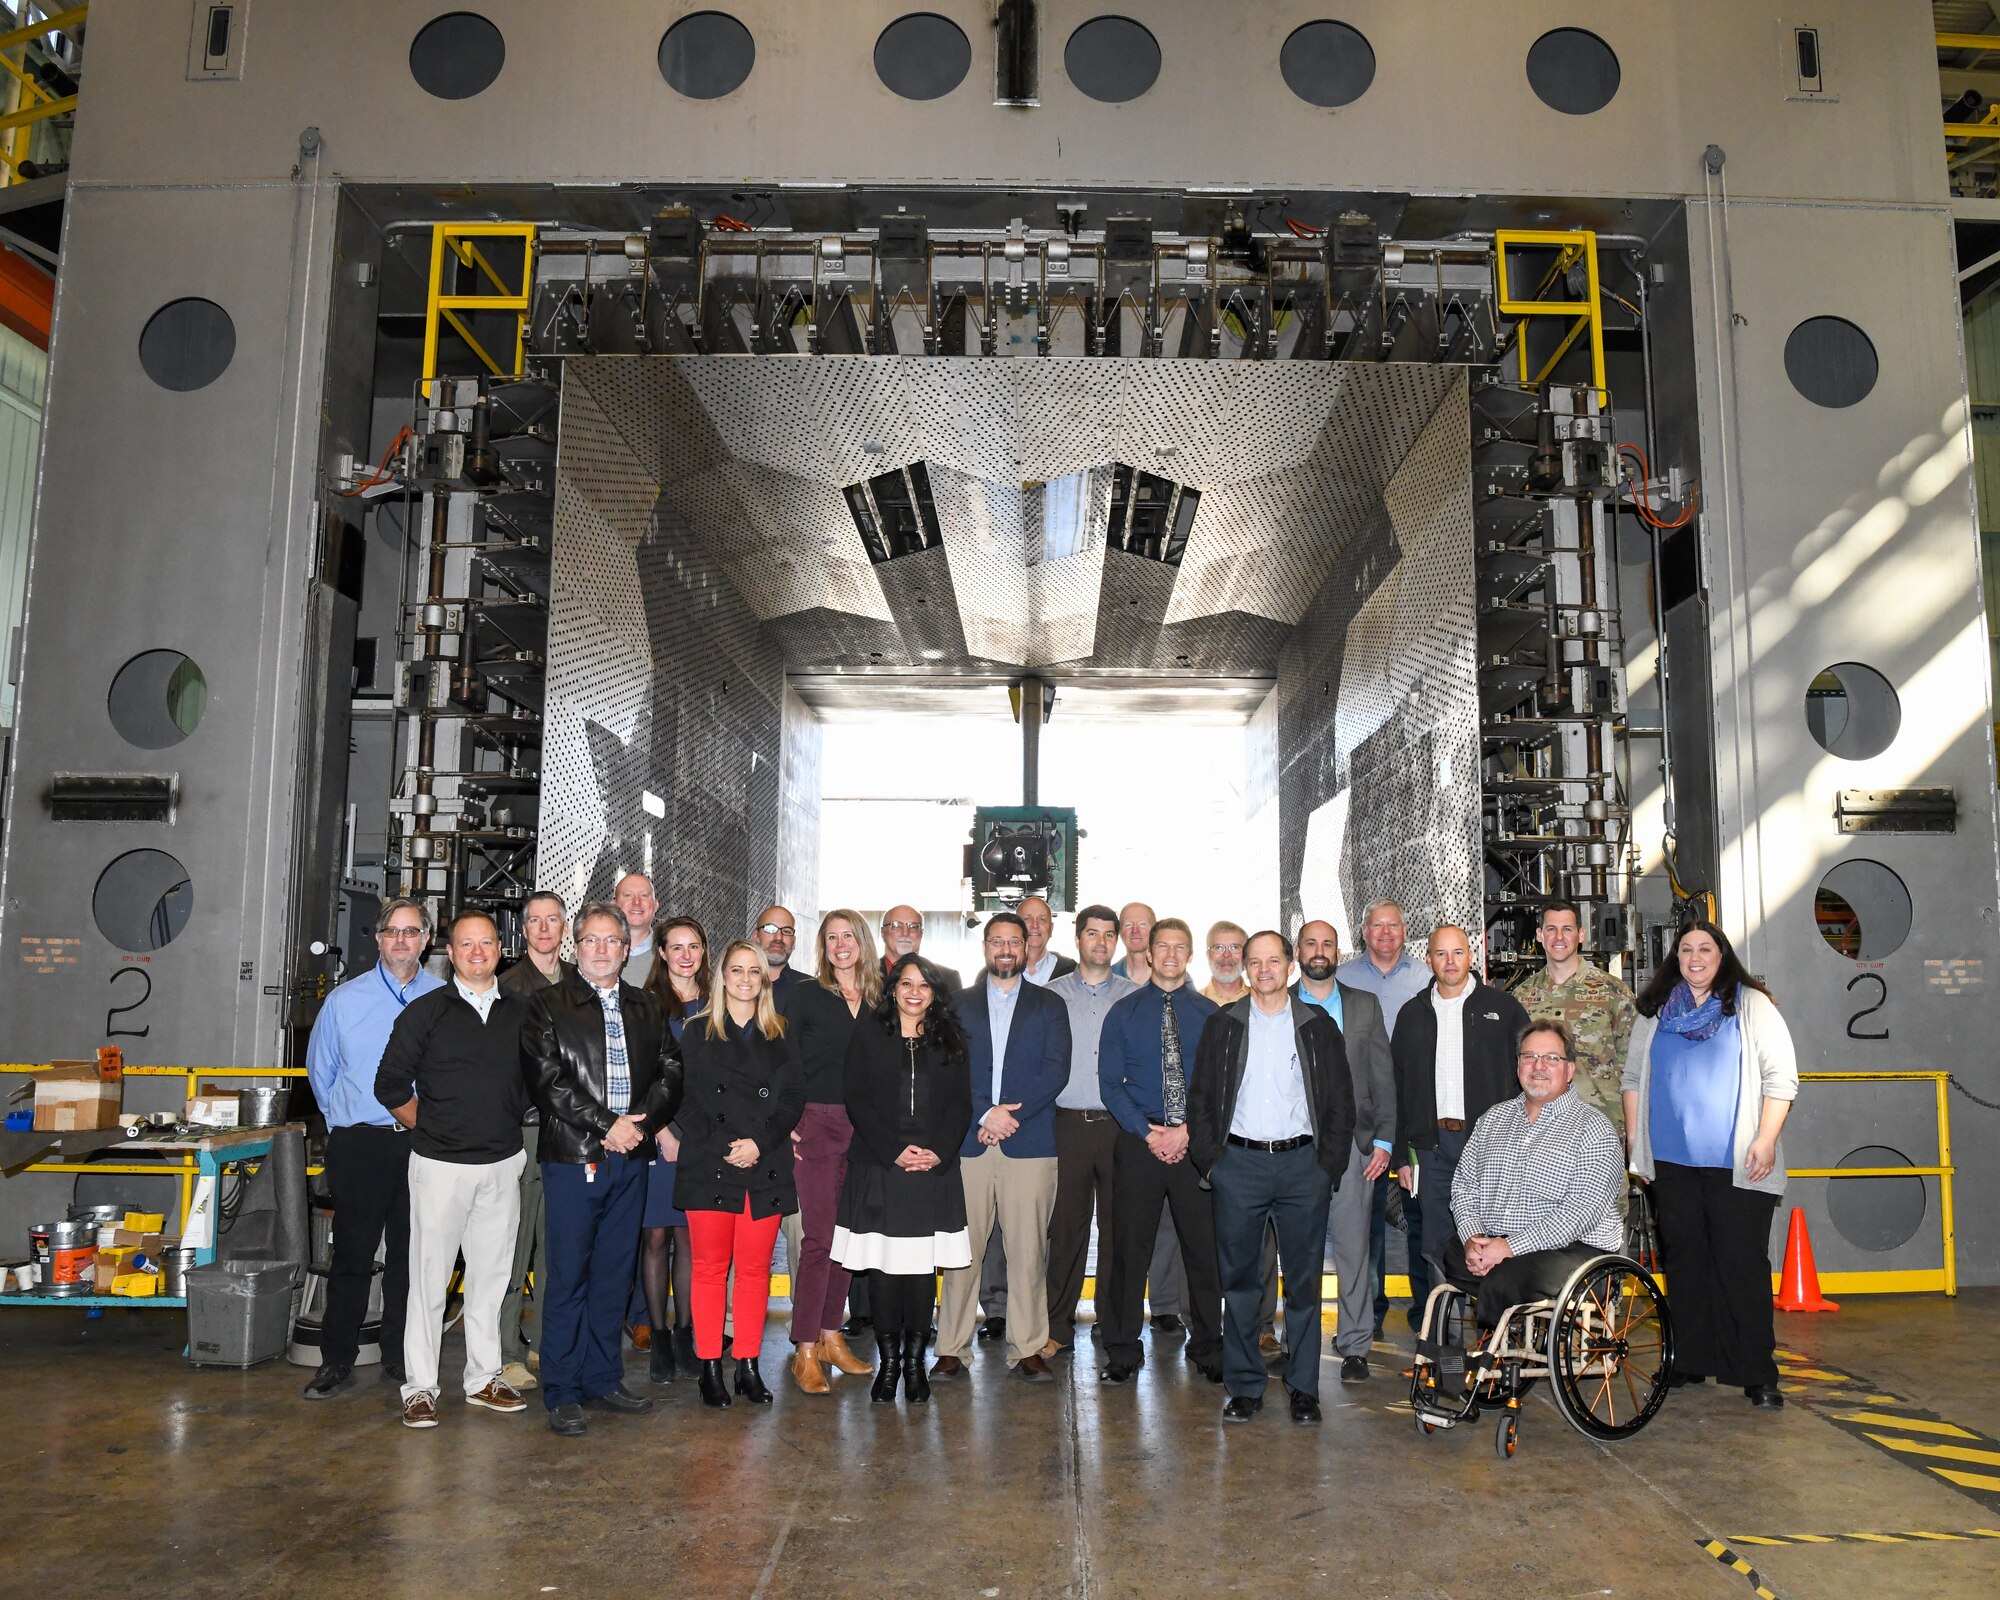 Air Force Test Center technical leaders pose for a photo in front of one of the test carts used in the Propulsion Wind Tunnel Facility at Arnold Air Force Base, Tennessee.